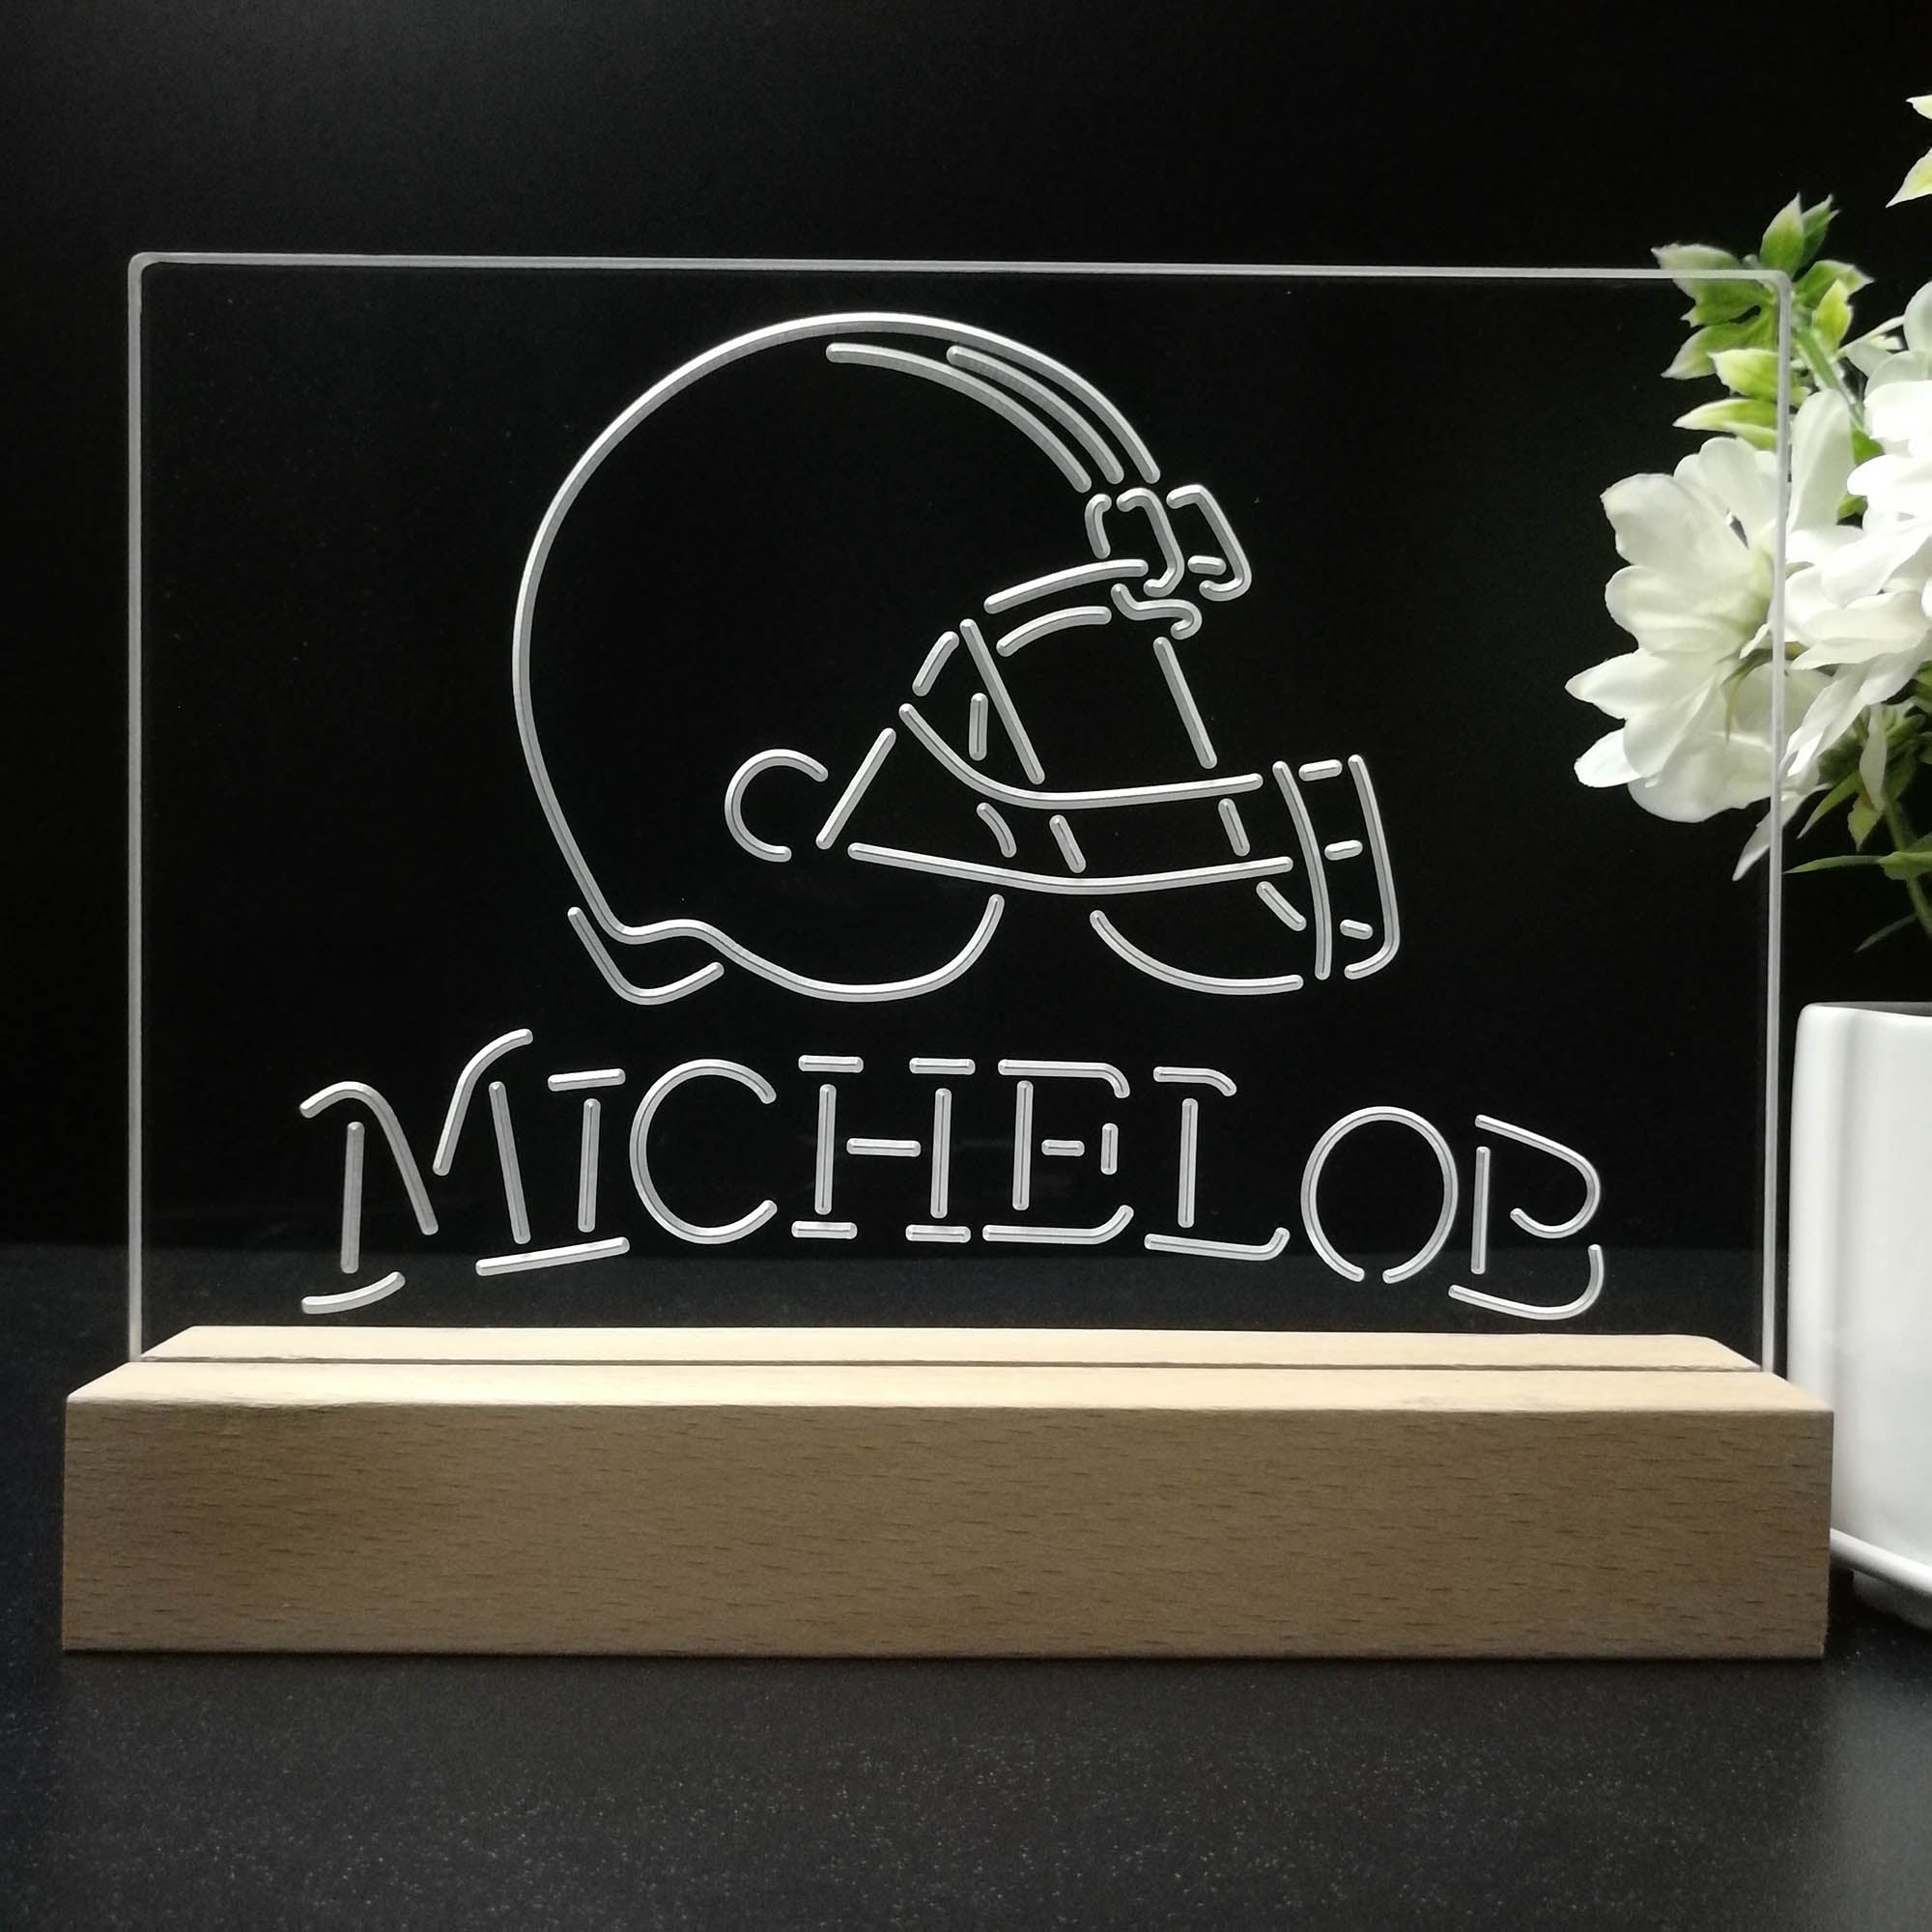 Michelob Bar Cleveland Browns Night Light LED Sign